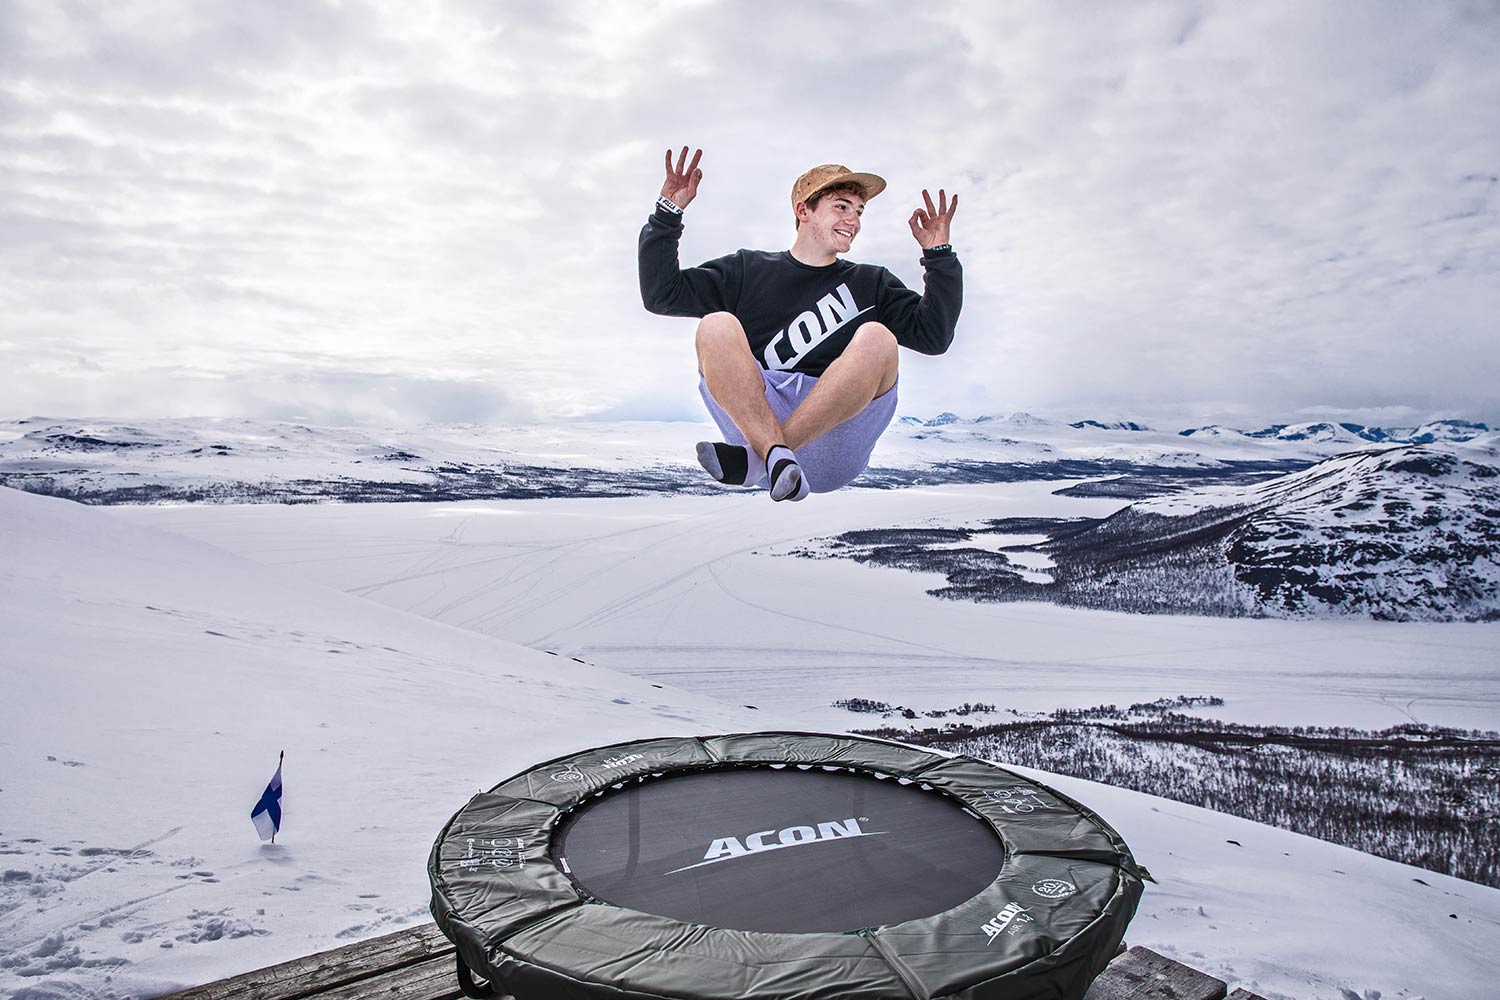 A guy jumping on a trampoline outdoors during winter